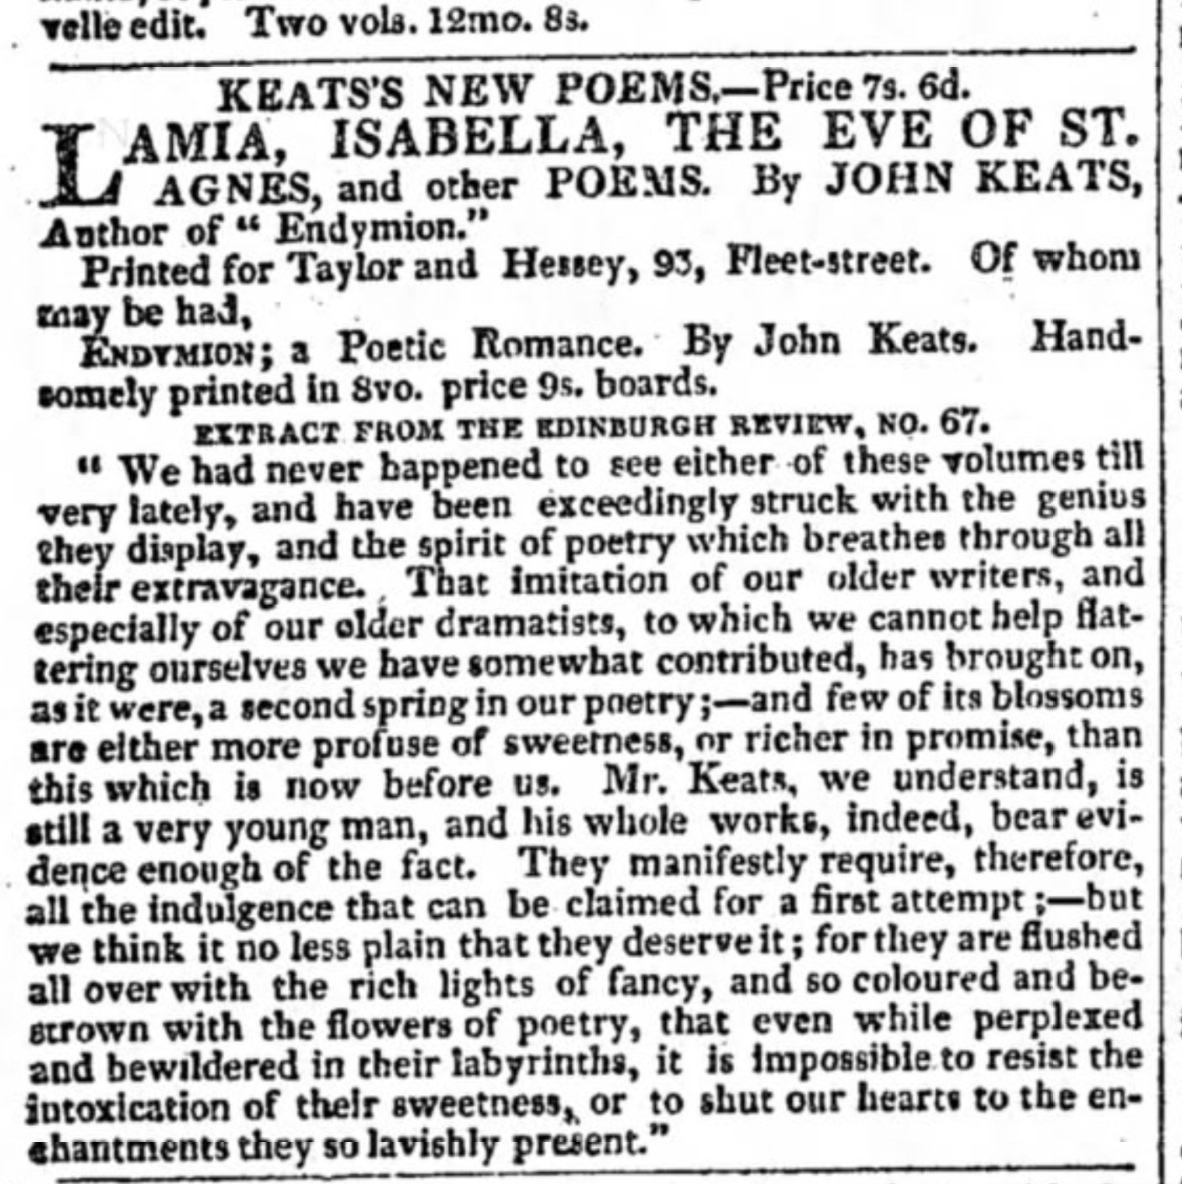 Keats’s New Poems, advertised in The Morning
          Chronicle, 28 Feb 1821, unaware of Keats’s death